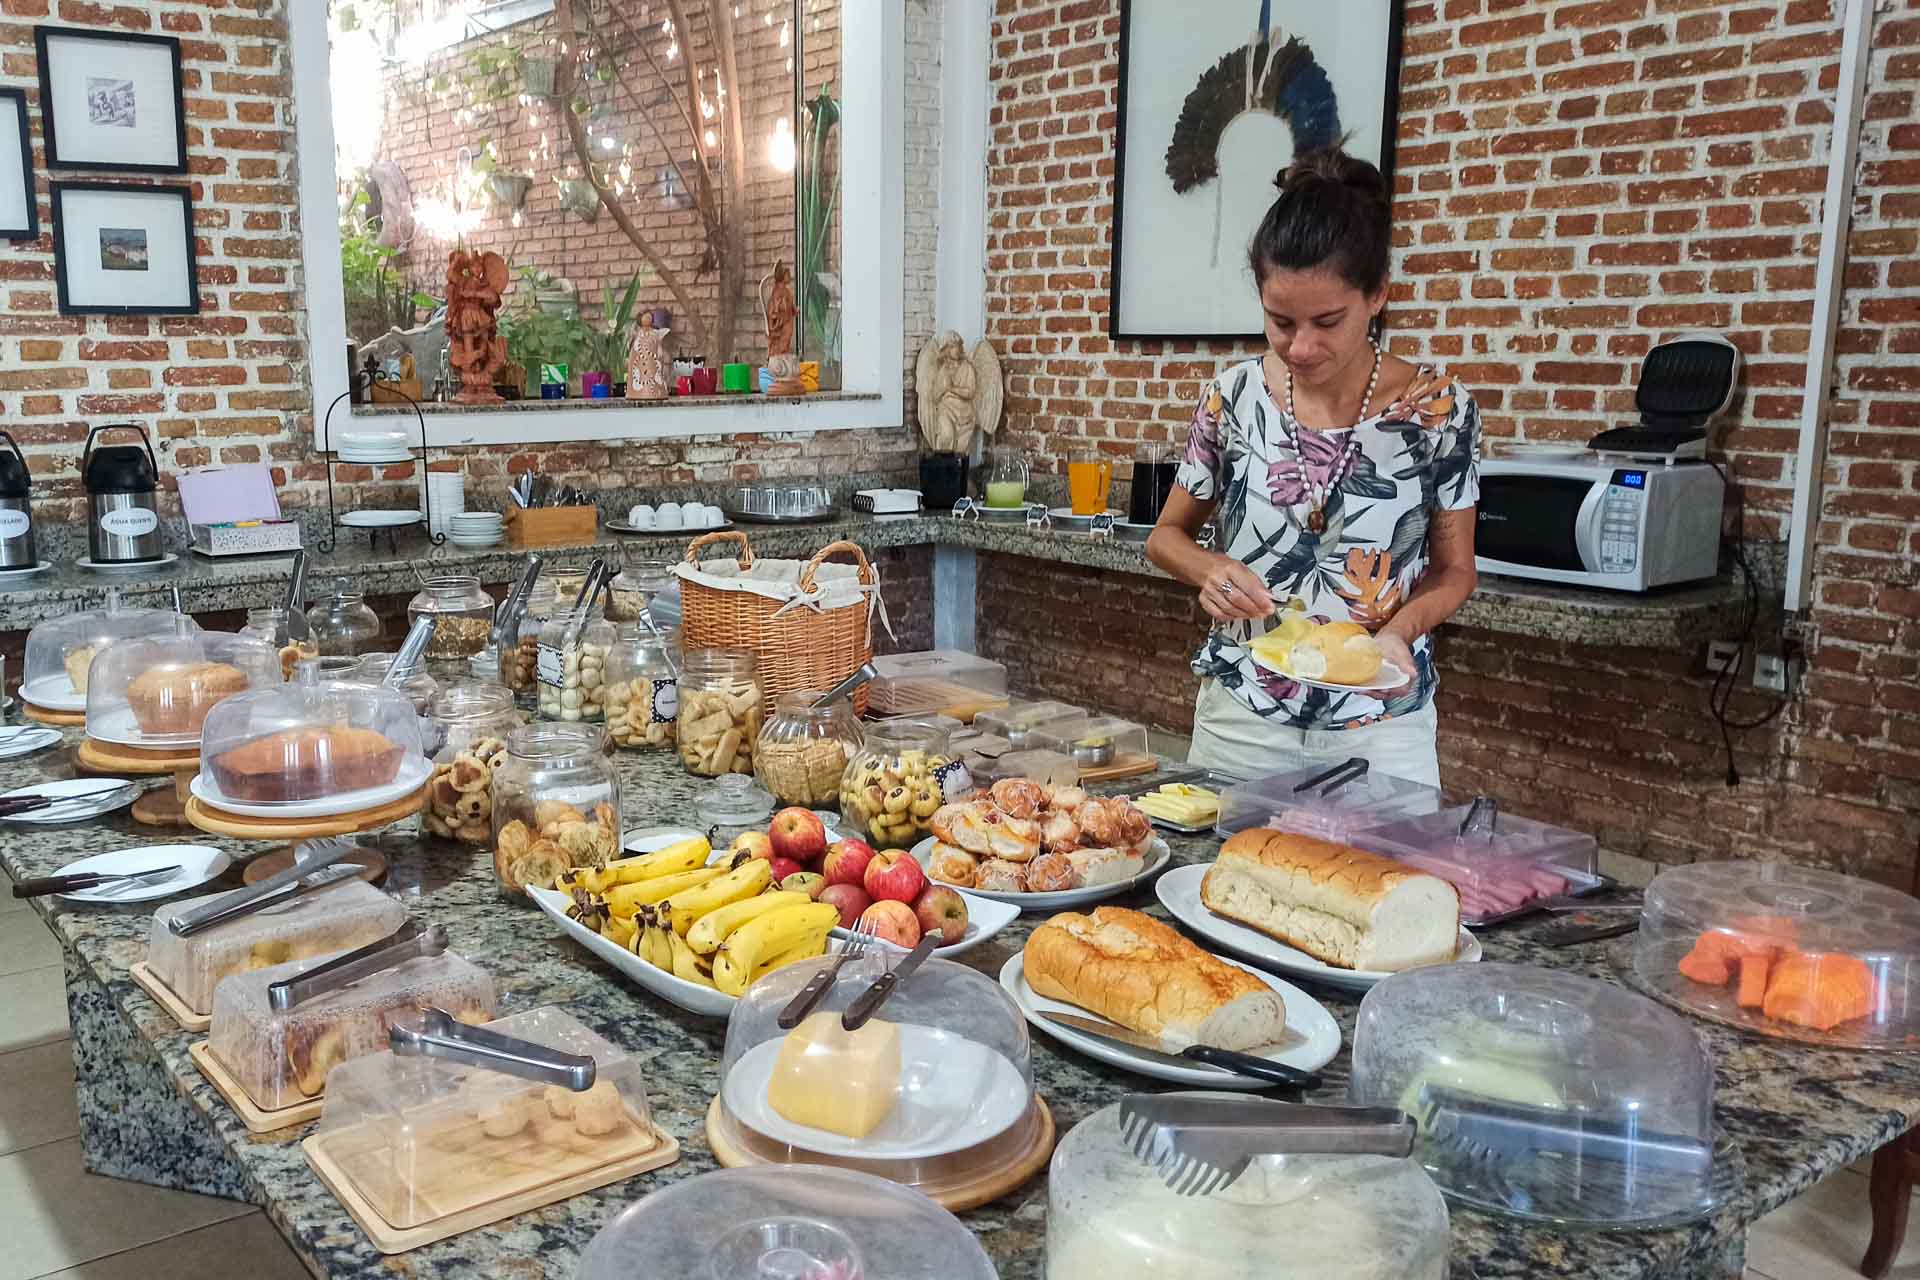 Fernanda in front of a large table of breakfast full of food, fruit and juices, in a room with brick walls at the Hotel Virginia in Corumba, Brazil